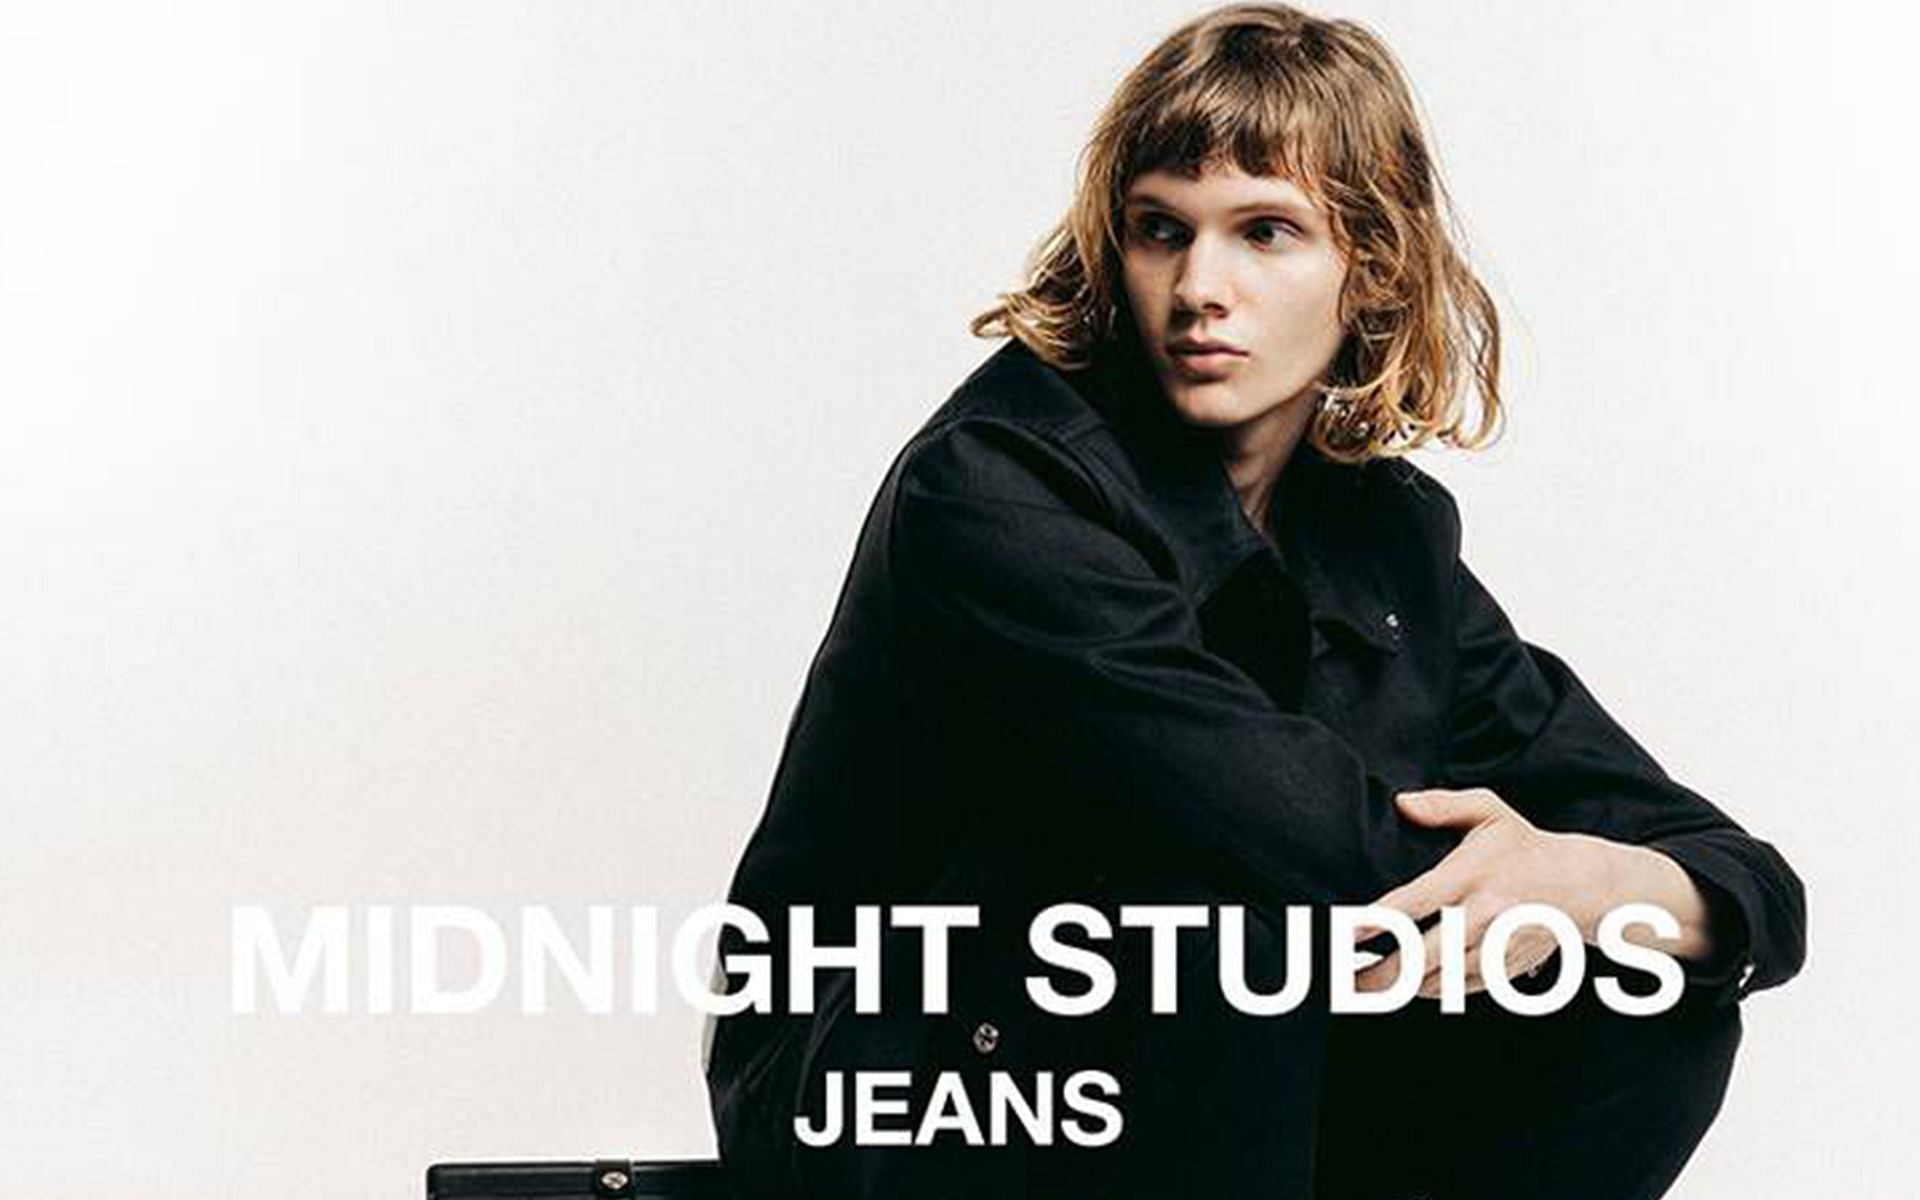 MIDNIGHT STUDIOS Jeans collection is now available for purchase (Image via Sportskeeda)